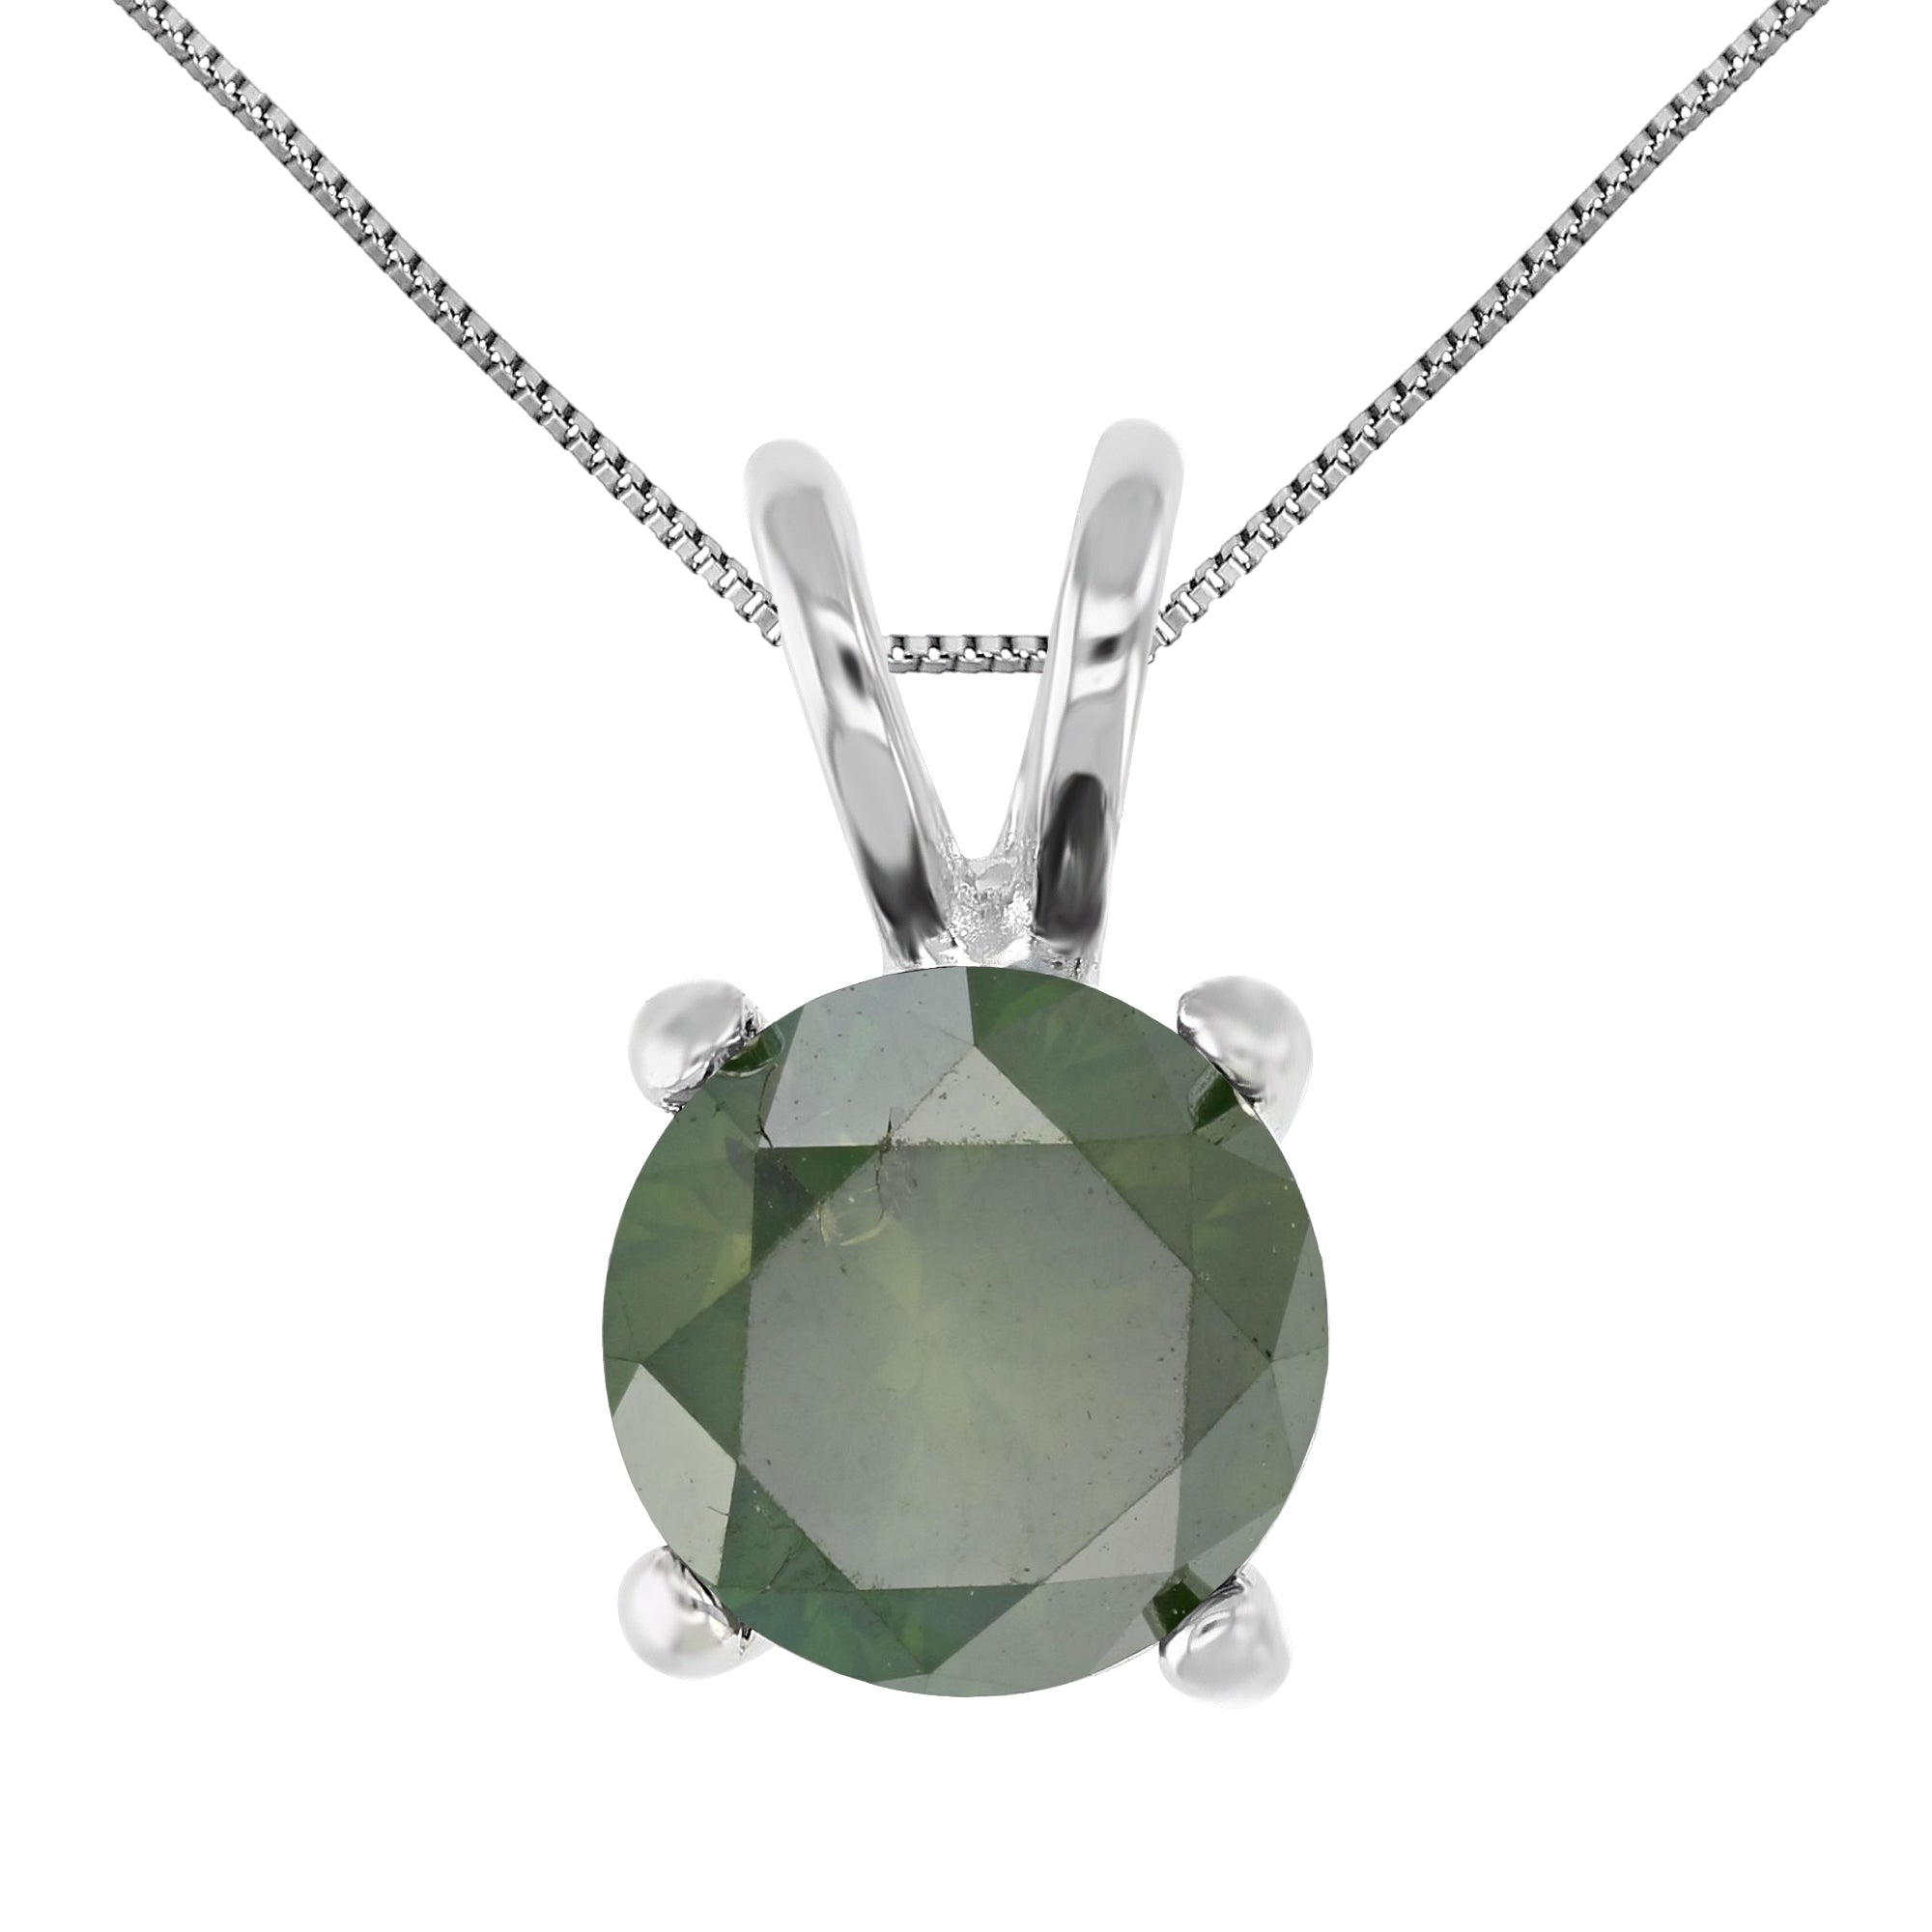 2 cttw Diamond Pendant, Green Diamond Solitaire Pendant Necklace for Women in 14K White Gold with 18 Inch Chain, Prong Setting